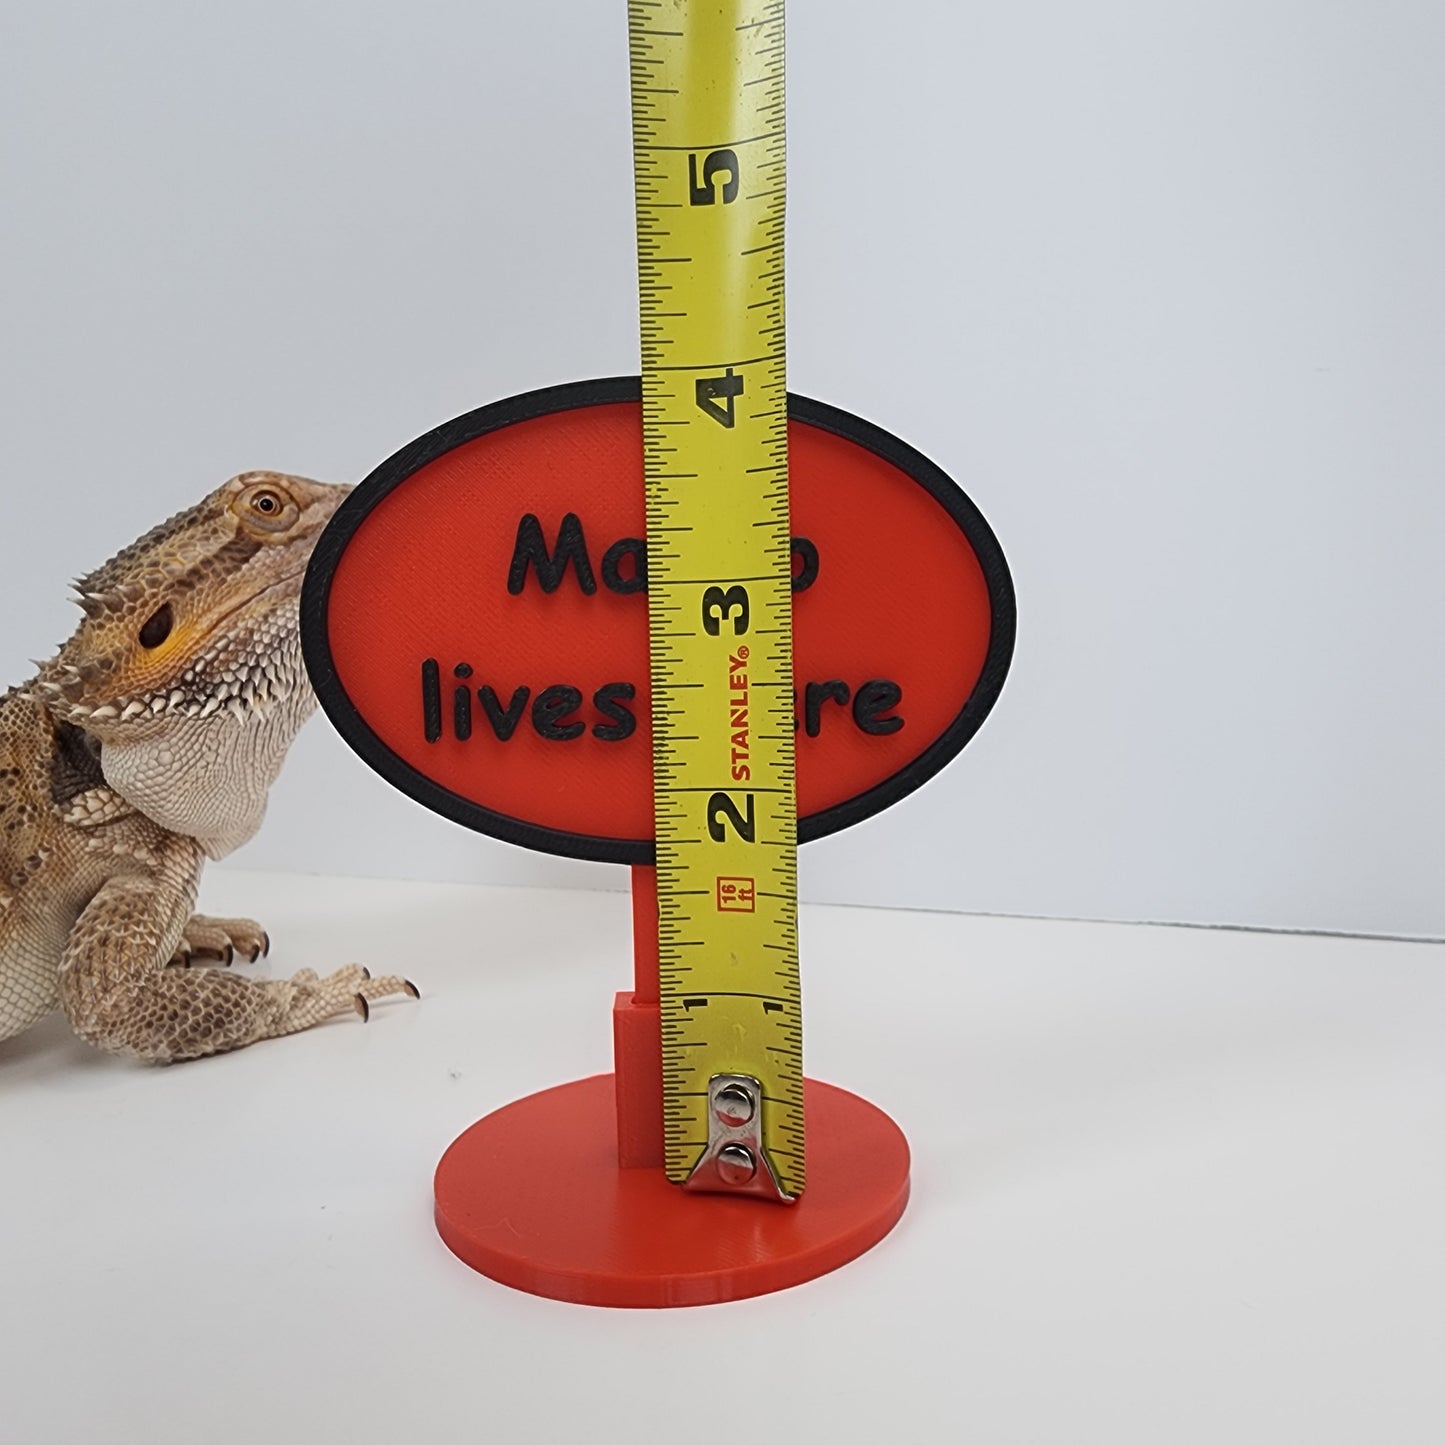 Personalized Name Sign with Stand for Amphibians, Reptiles and More! Bearded dragons, Geckos, Tarantulas, Snakes, Chameleons and more!